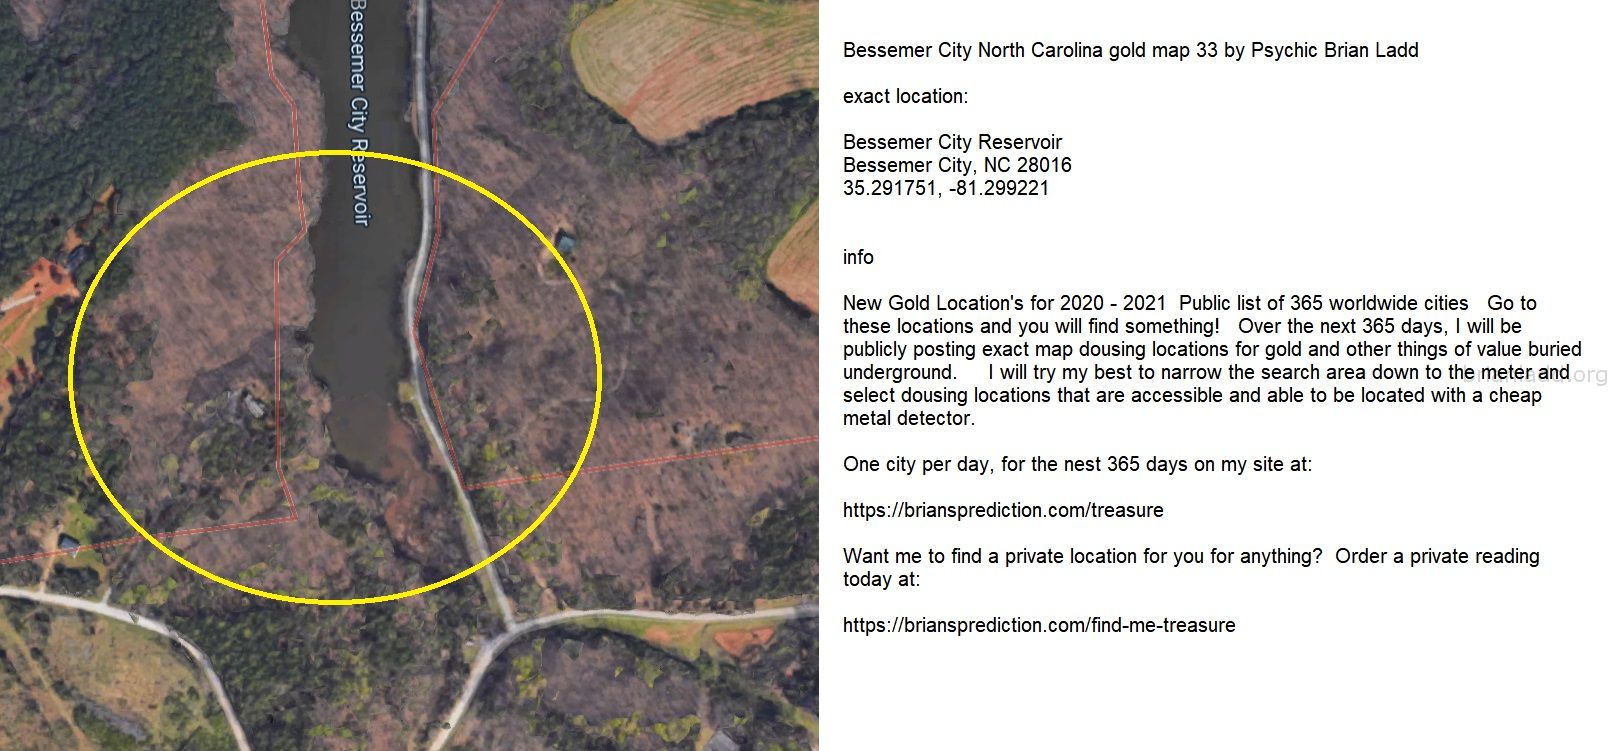 Bessemer City North Carolina gold map 33 by Psychic Brian Ladd
New Gold Location's for 2020 - 2021  Public list of 365 worldwide cities   Go to these locations and you will find something!   Over the next 365 days, I will be publicly posting exact map dousing locations for gold and other things of value buried underground.     I will try my best to narrow the search area down to the meter and select dousing locations that are accessible and able to be located with a cheap metal detector. One city per day, for the nest 365 days on my site at:  https://briansprediction.com/treasure  Want me to find a private location for you for anything?  Order a private reading today at:  https://briansprediction.com/find-me-treasure
